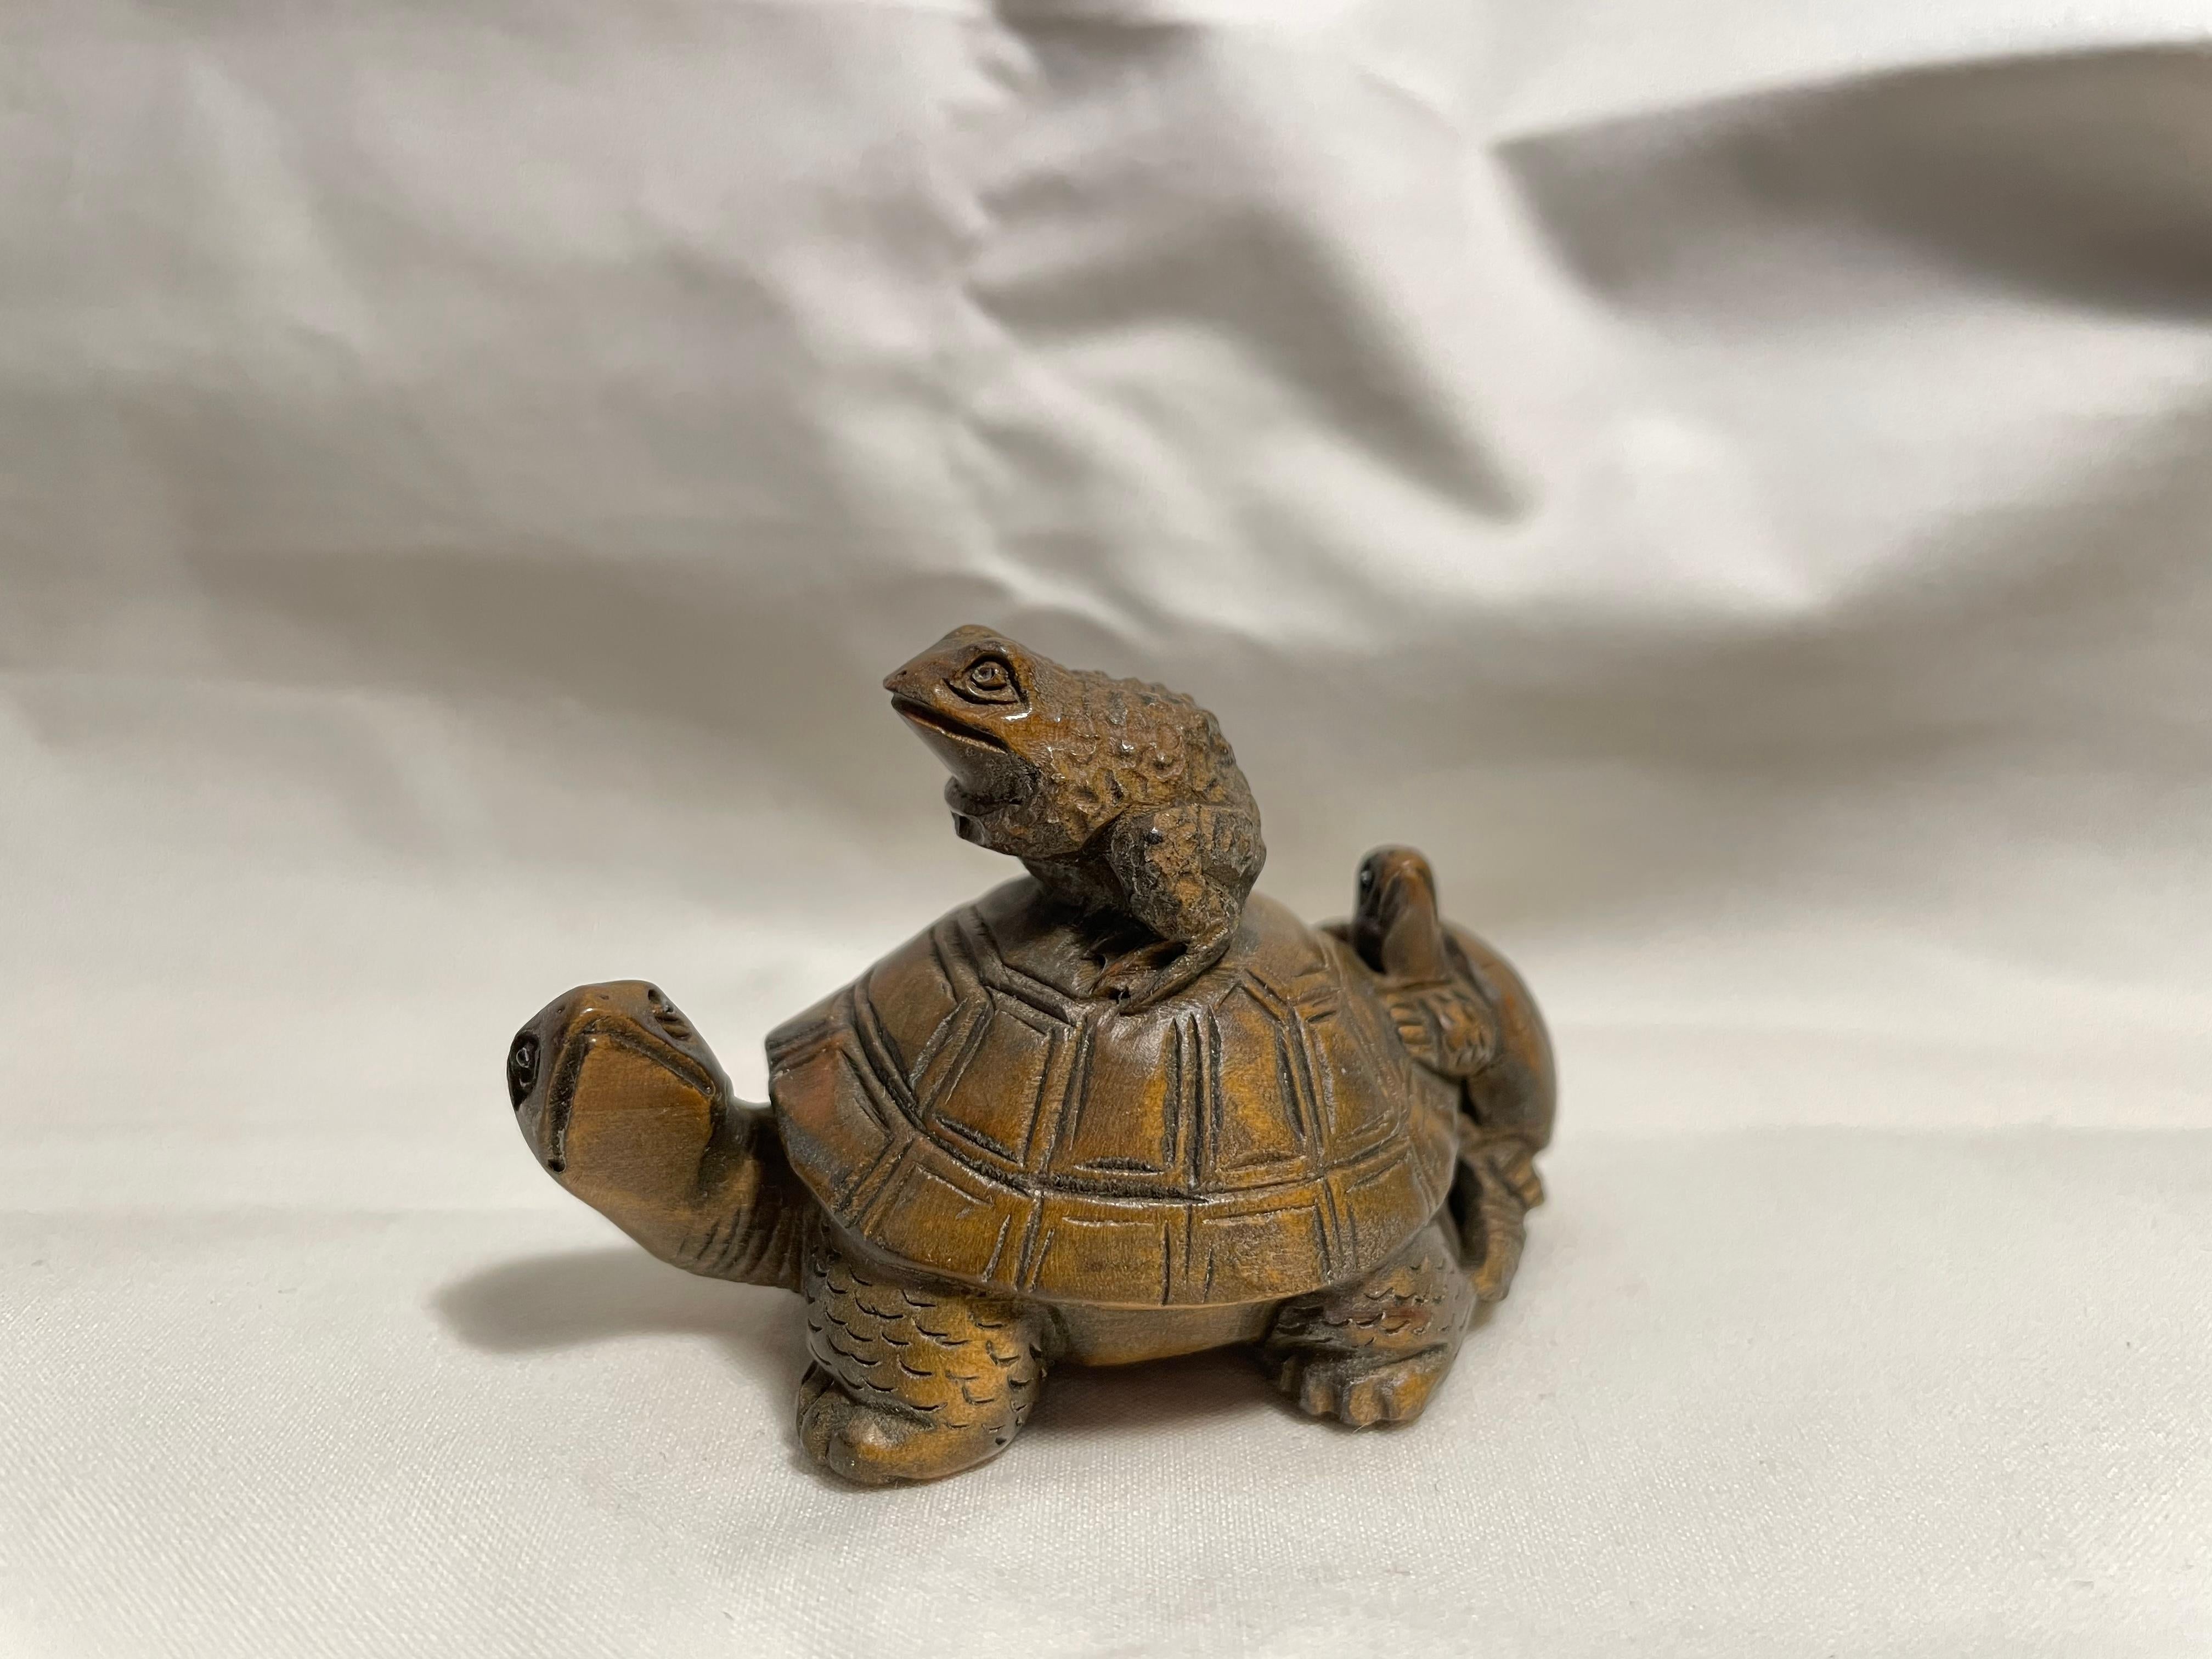 This is an antique netsuke made in Japan around Edo period 1850s.
Netsuke is a miniature sculpture, originating in 17th century Japan.
Initially a simply-carved button fastener on the cords of an inro box, netsuke later developed into ornately